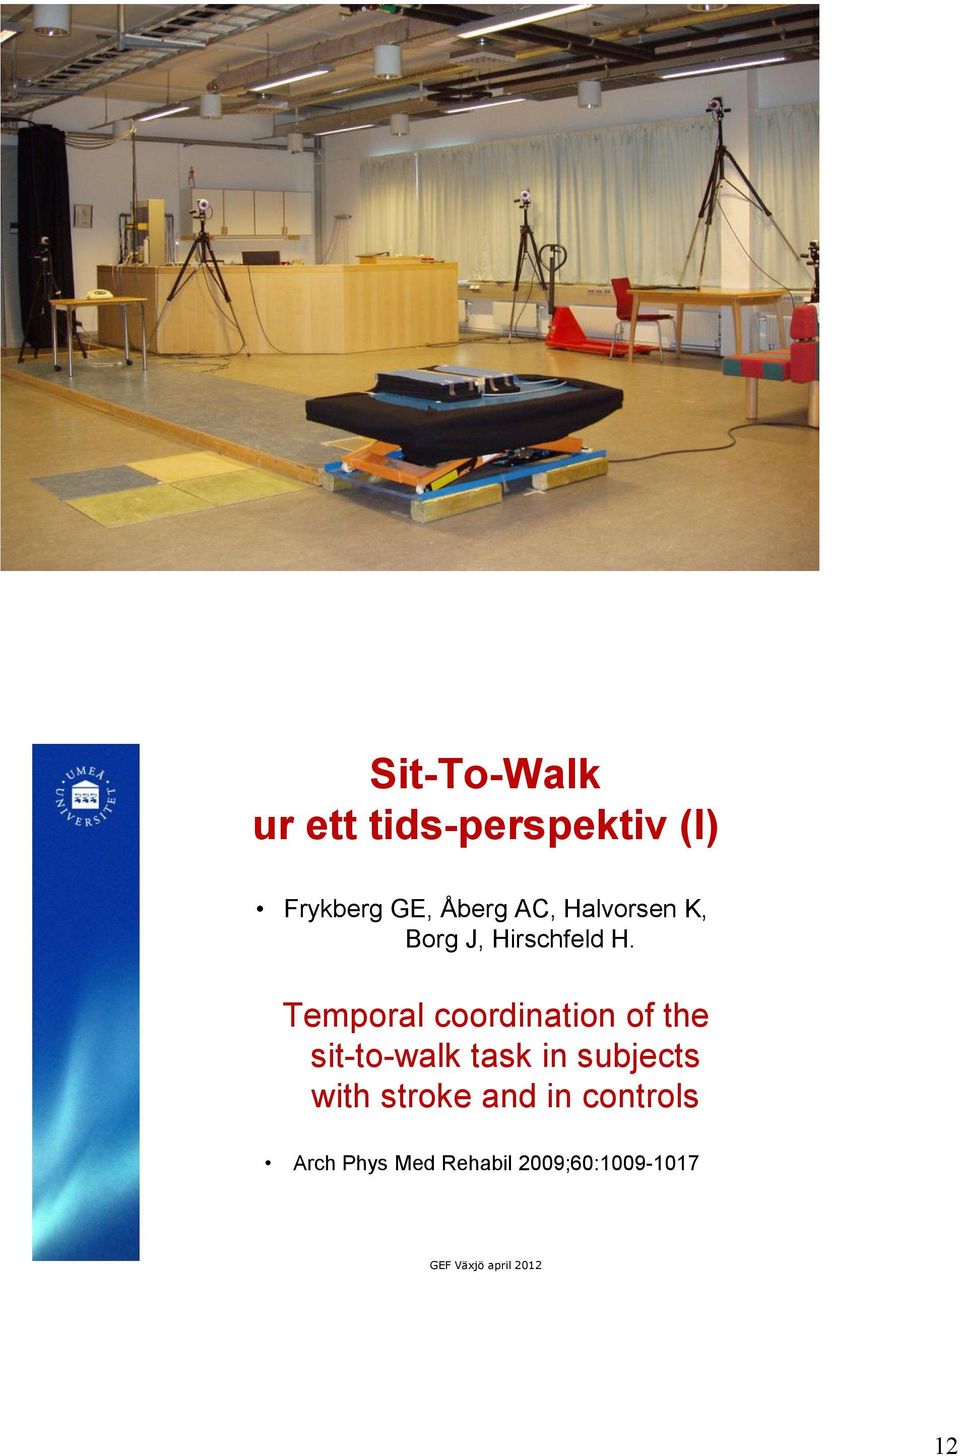 Temporal coordination of the sit-to-walk task in